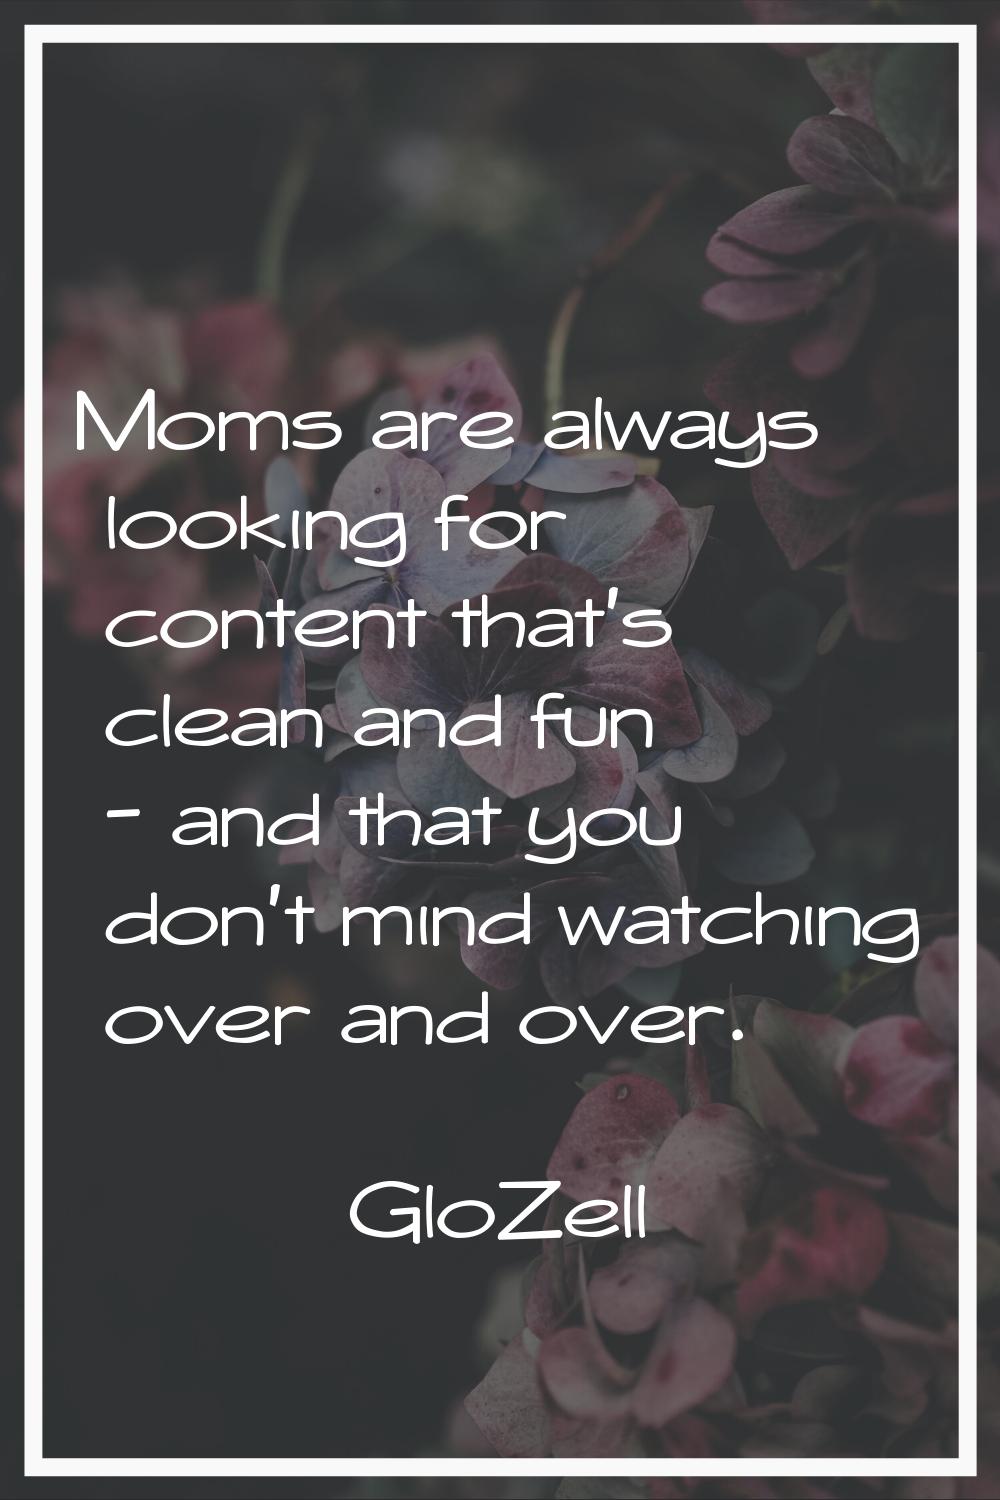 Moms are always looking for content that's clean and fun - and that you don't mind watching over an